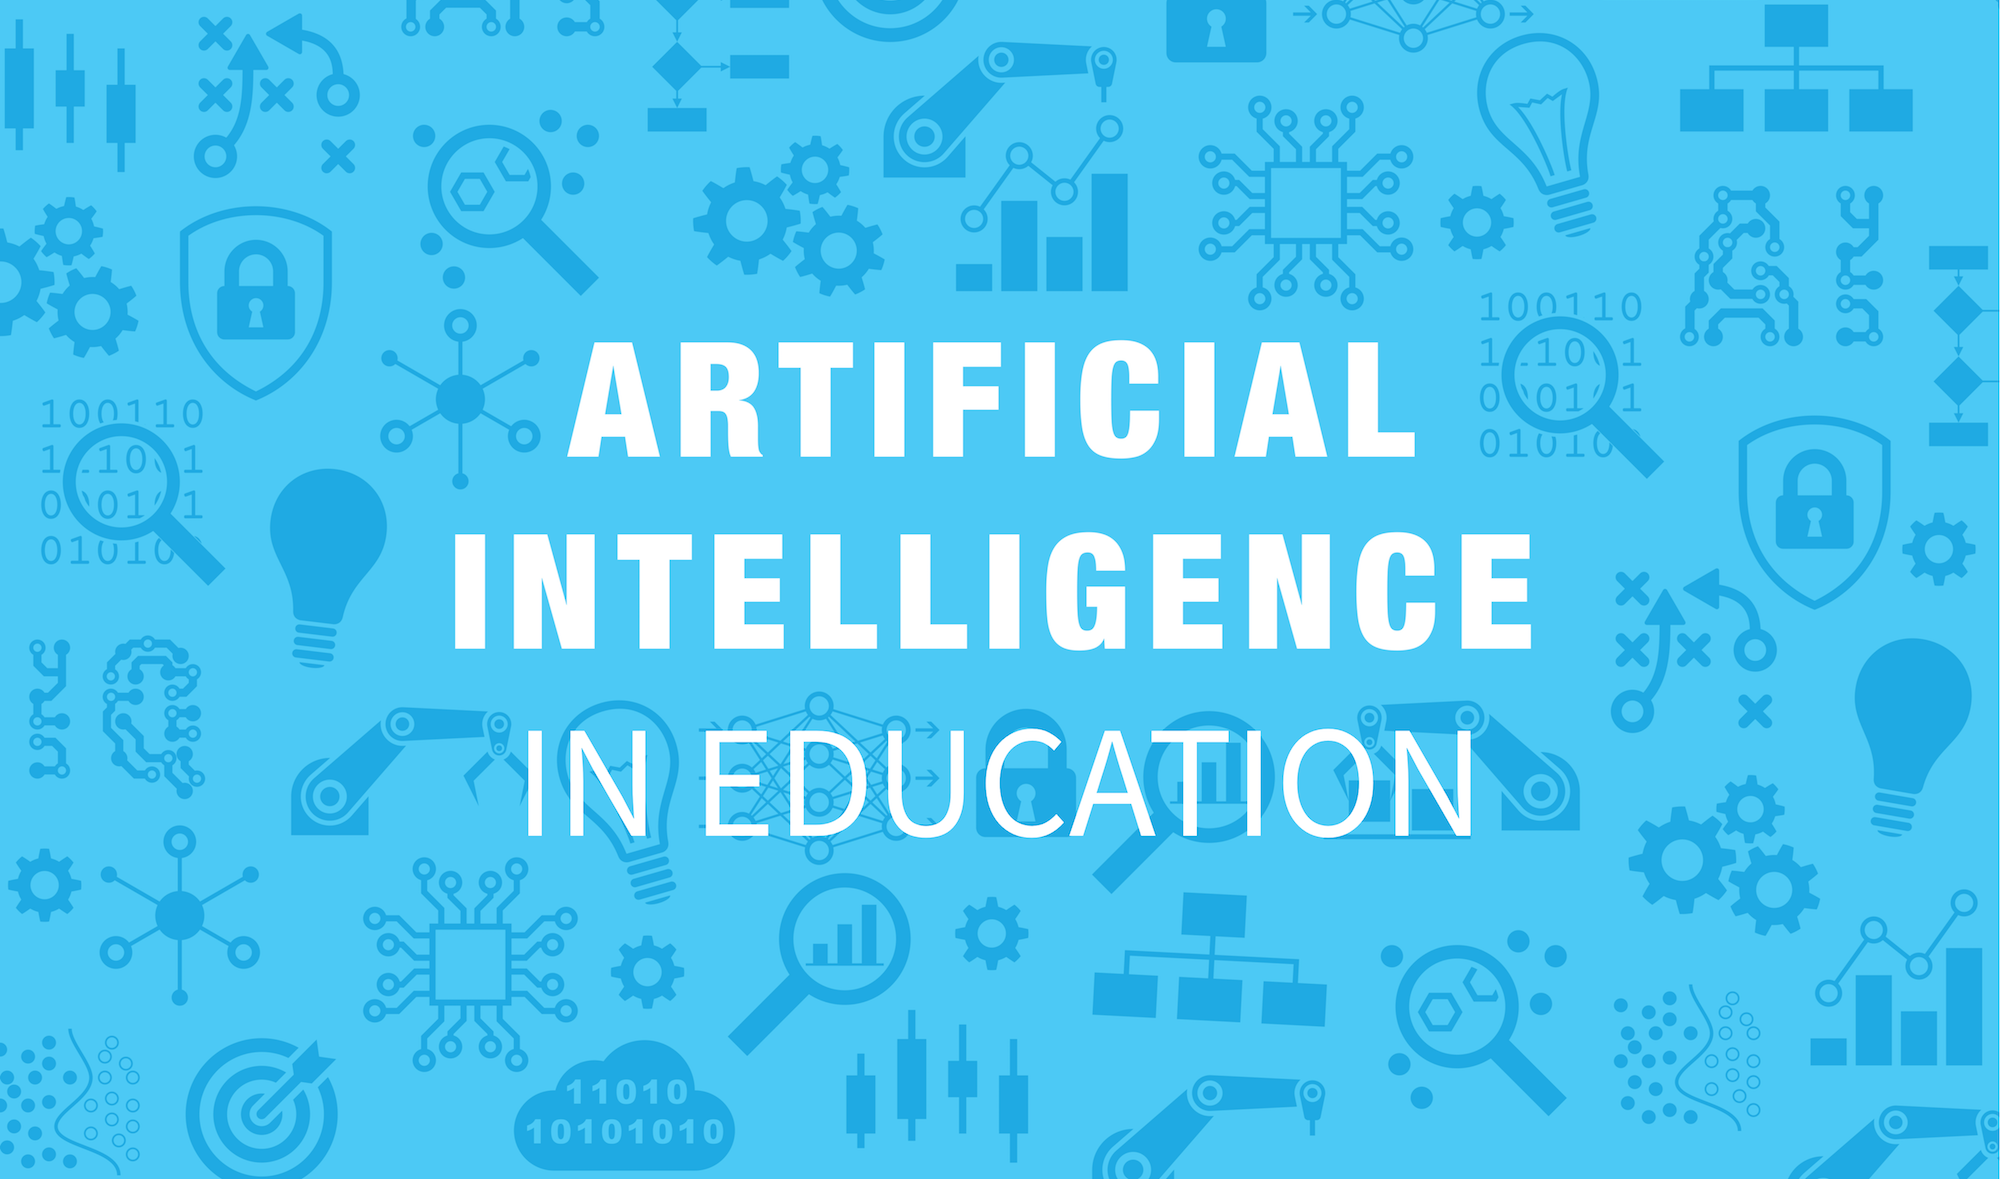 Global Artificial Intelligence (AI) in Education Market Share, Segmentation, Opportunities and Forecast to 2023